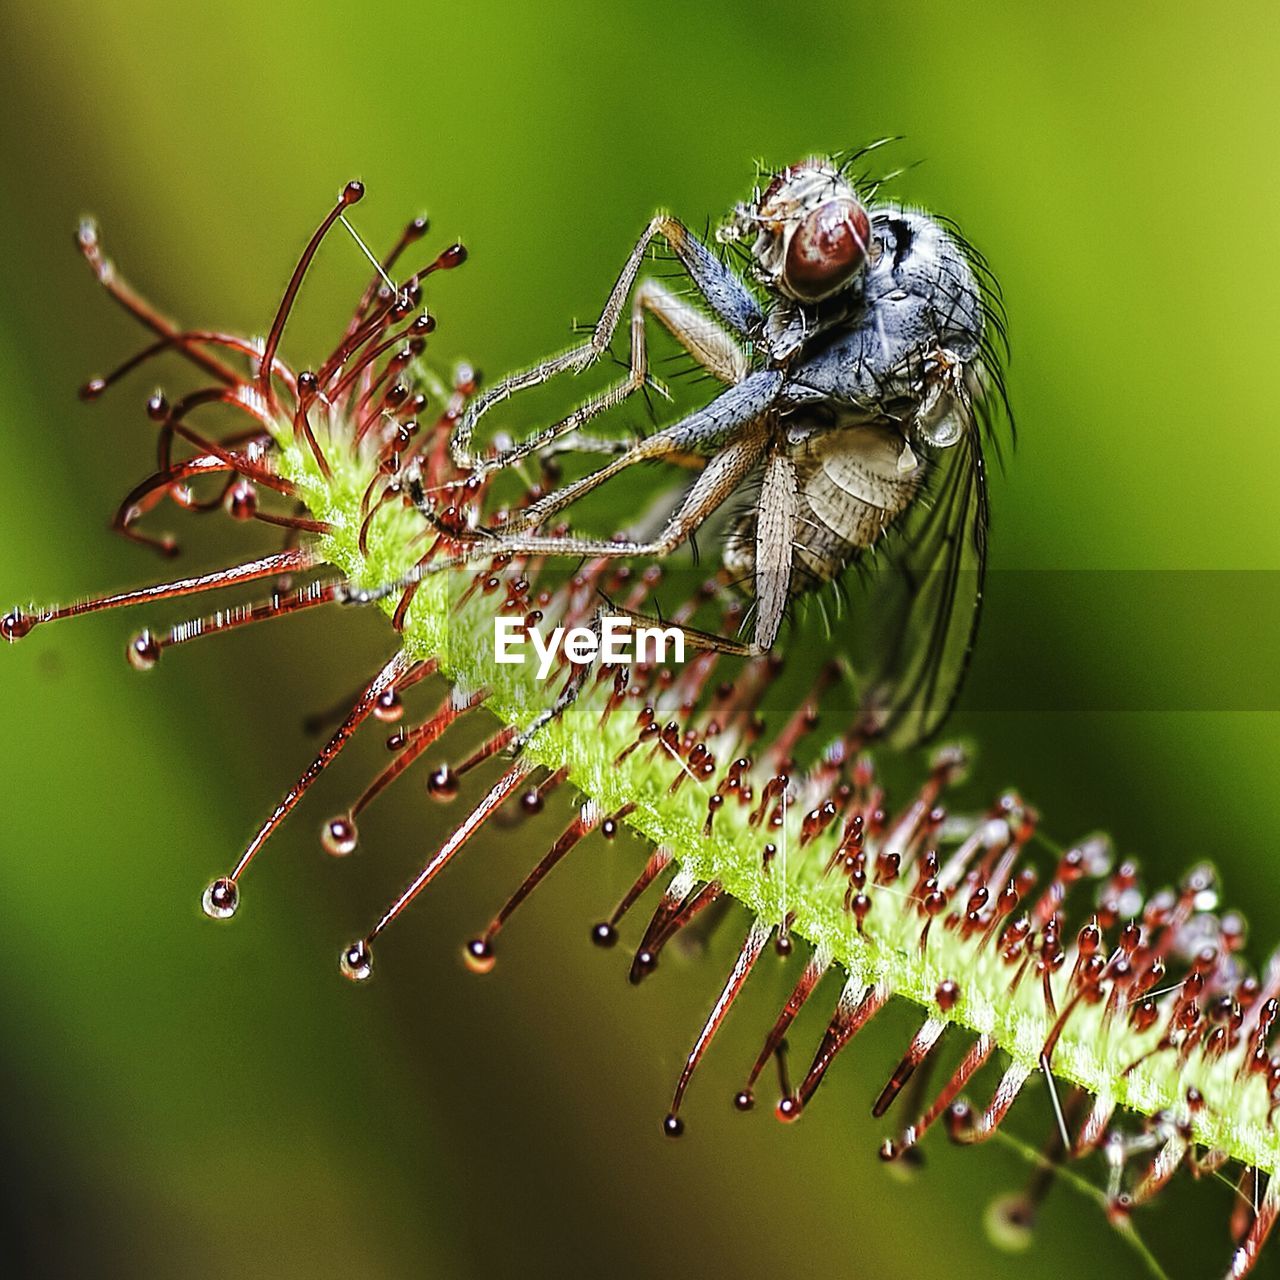 Mosquito caught by plant